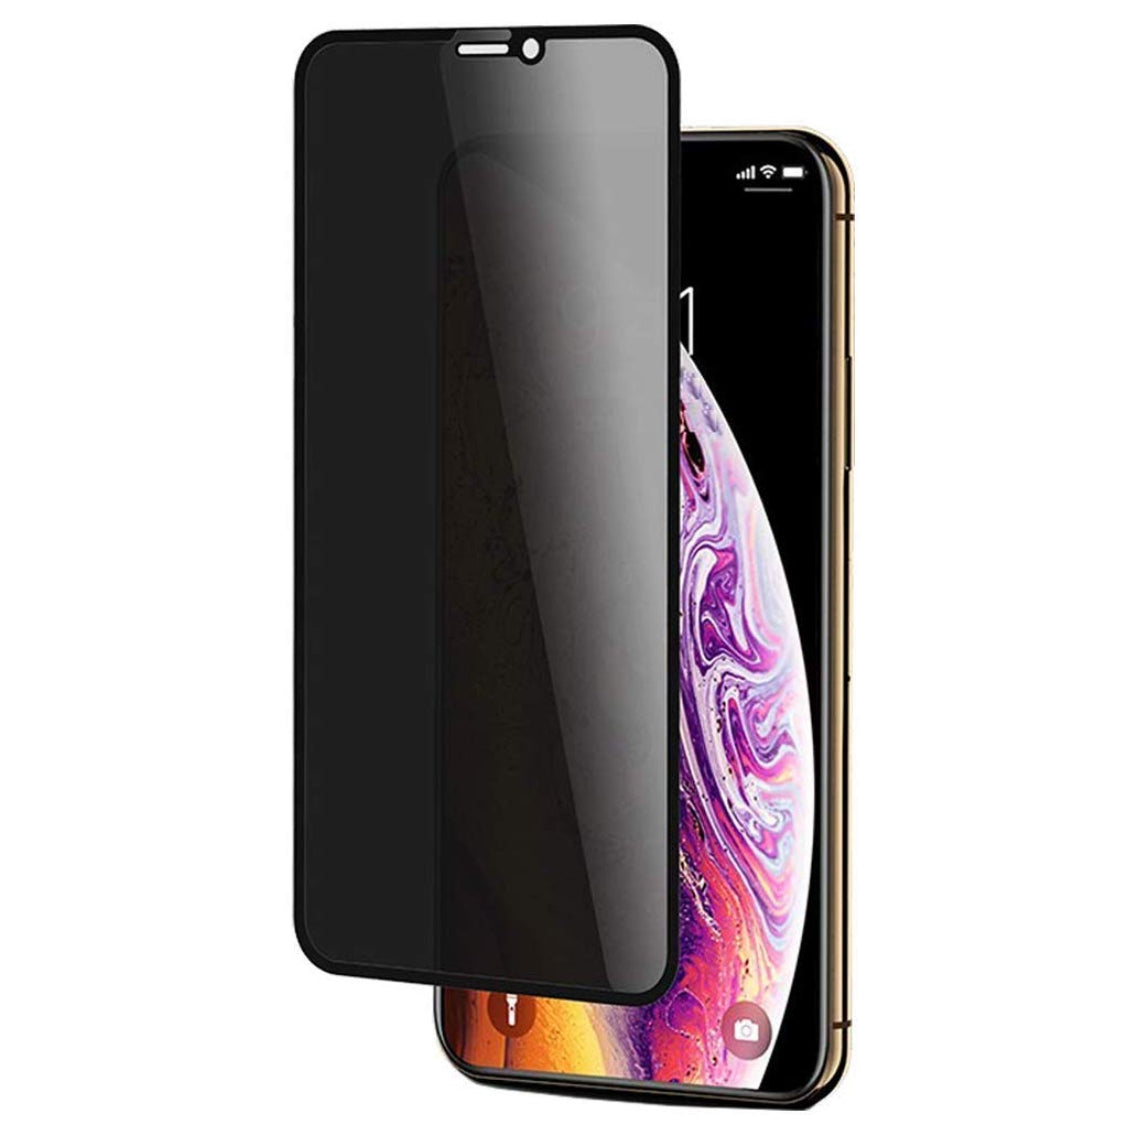 PRIVACY 5D BLACK GLASS - IPHONE XR/11